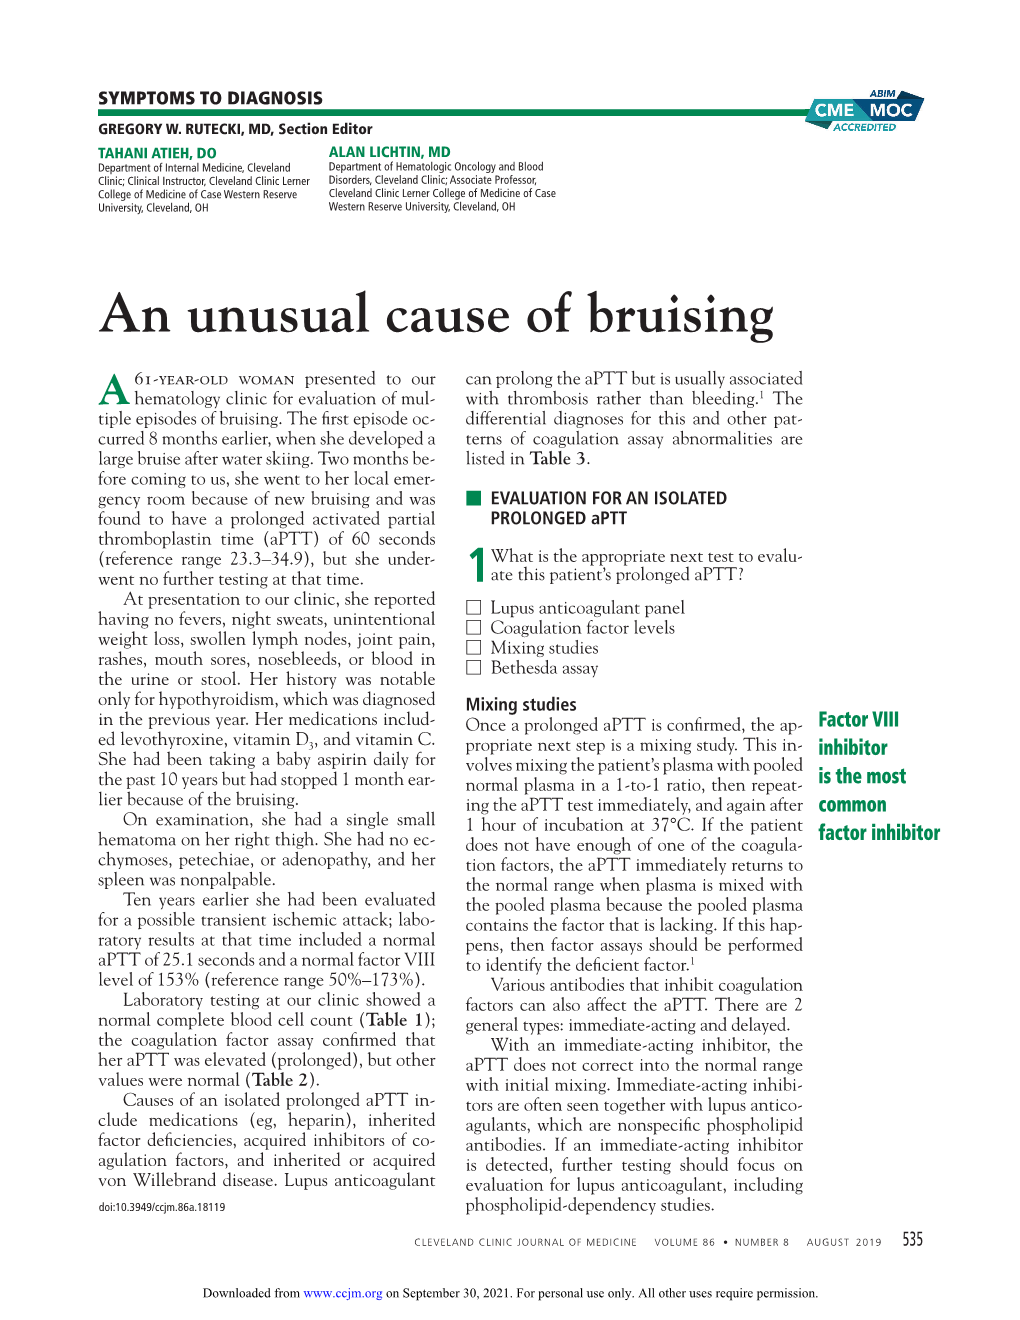 An Unusual Cause of Bruising